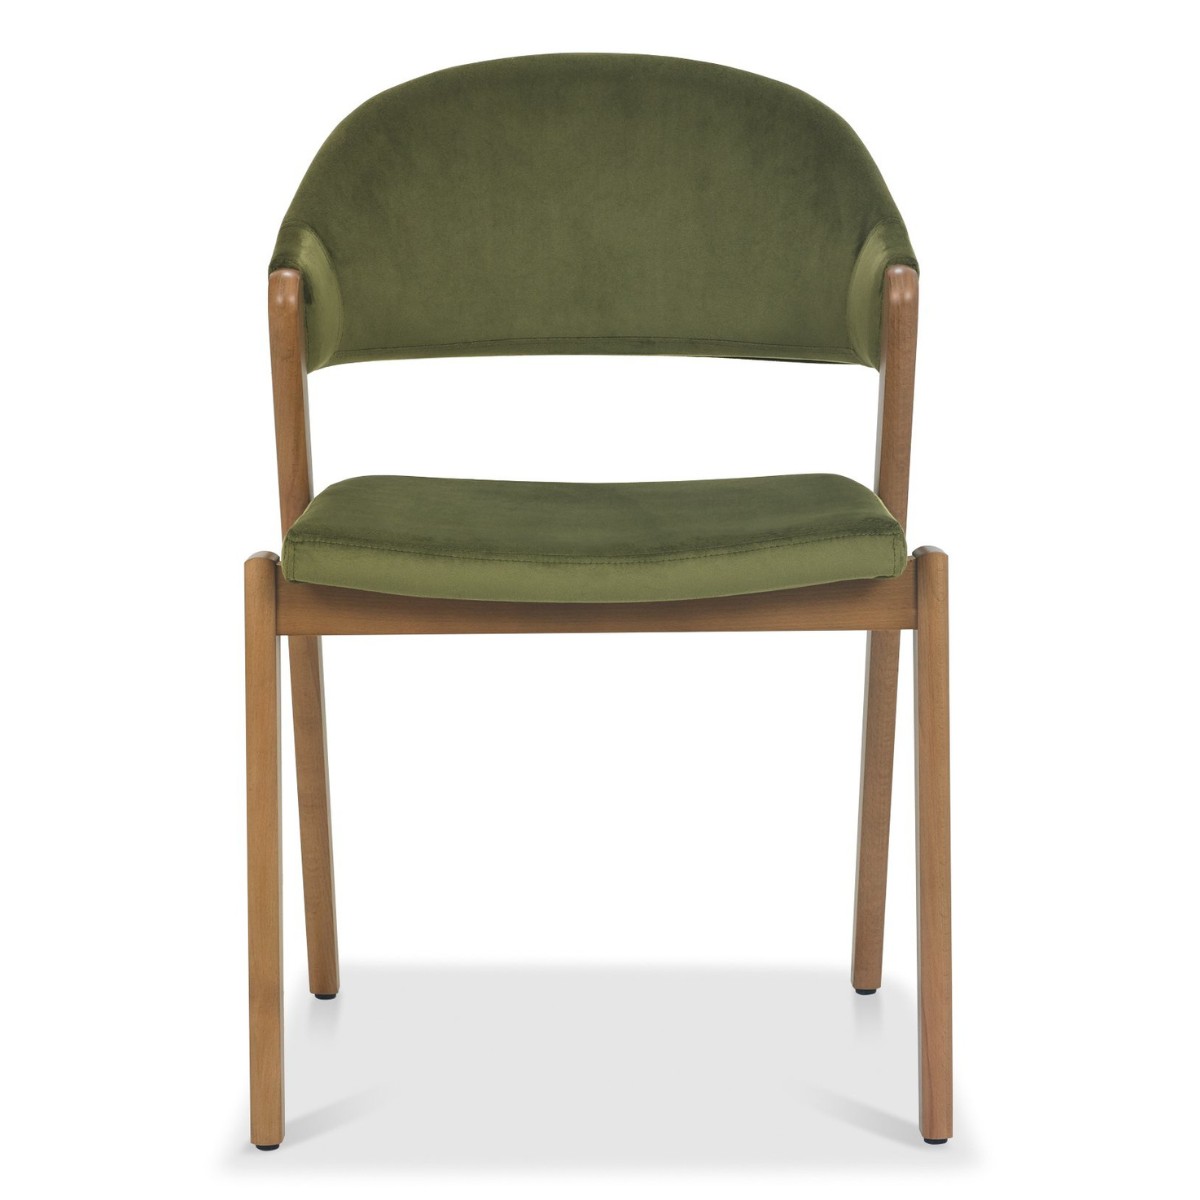 Chambery Rustic Oak Upholstered Dining Chair Green - 2